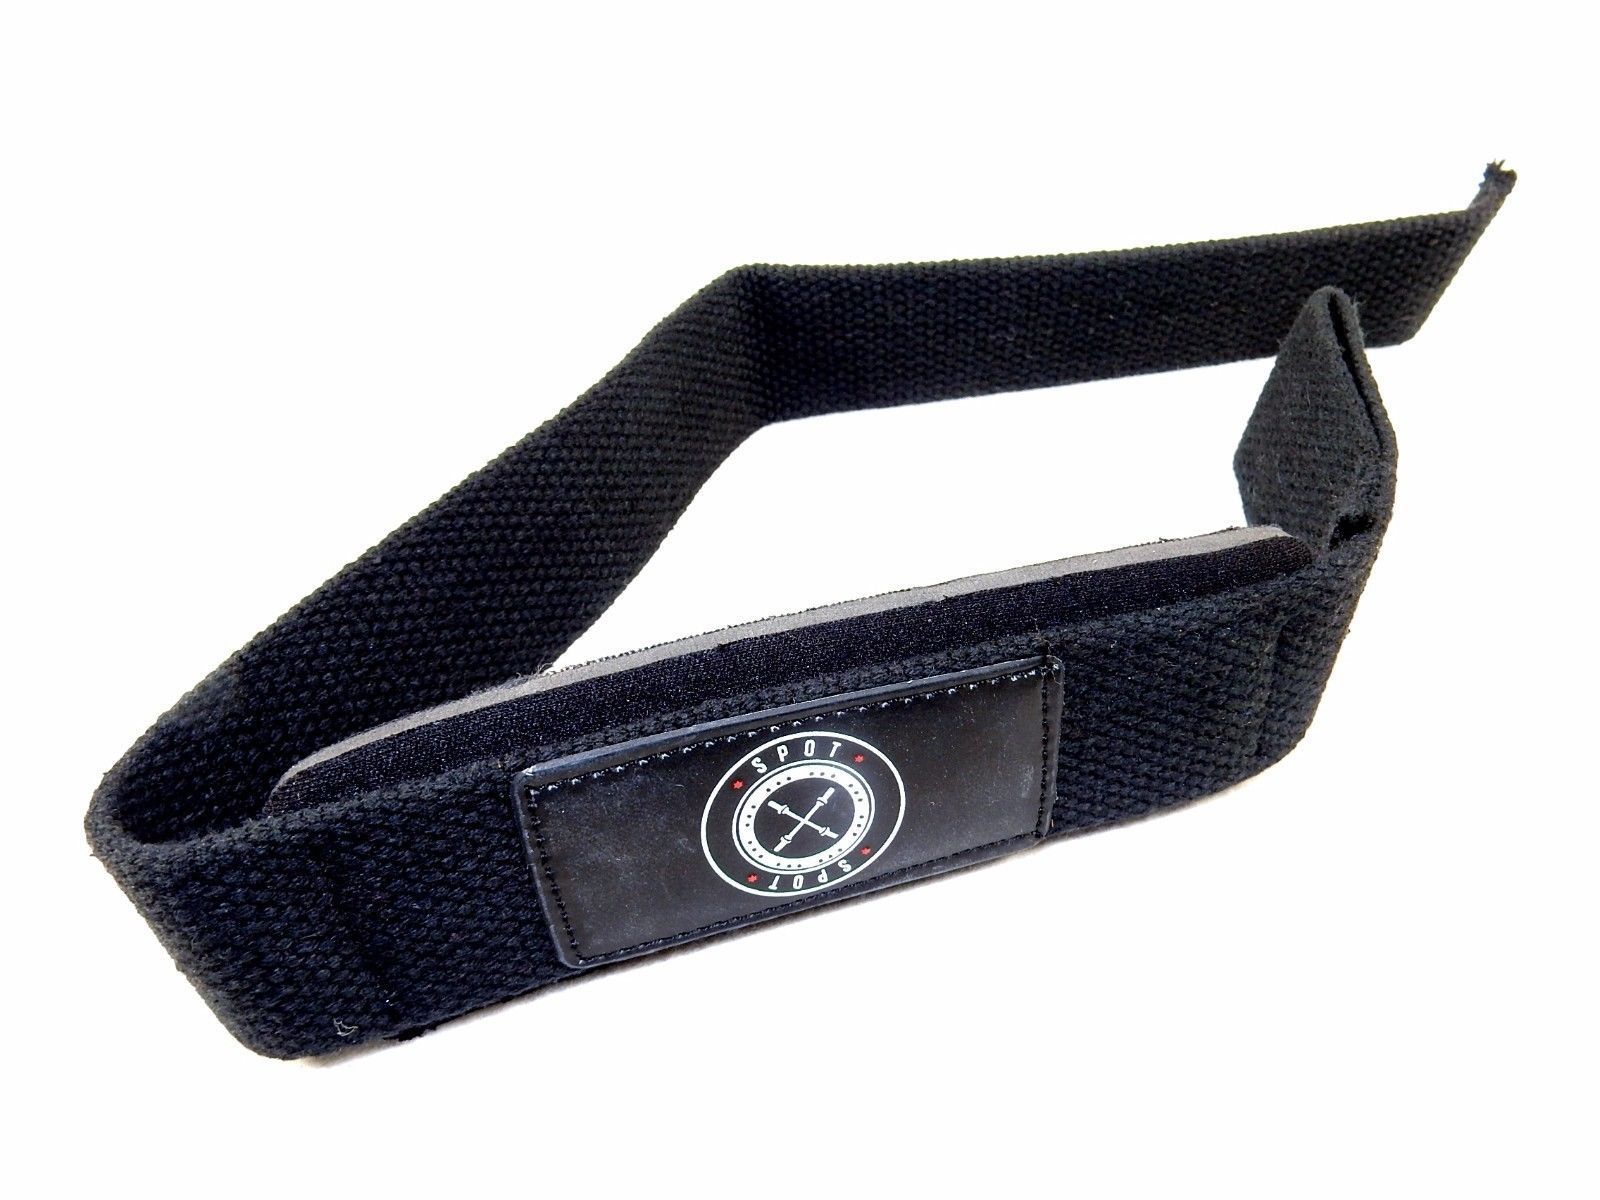 23" Gym Straps ~ Spot Lion Fitness, Power Weight Lifting, Solid Black ~ #SPL5 - $9.75